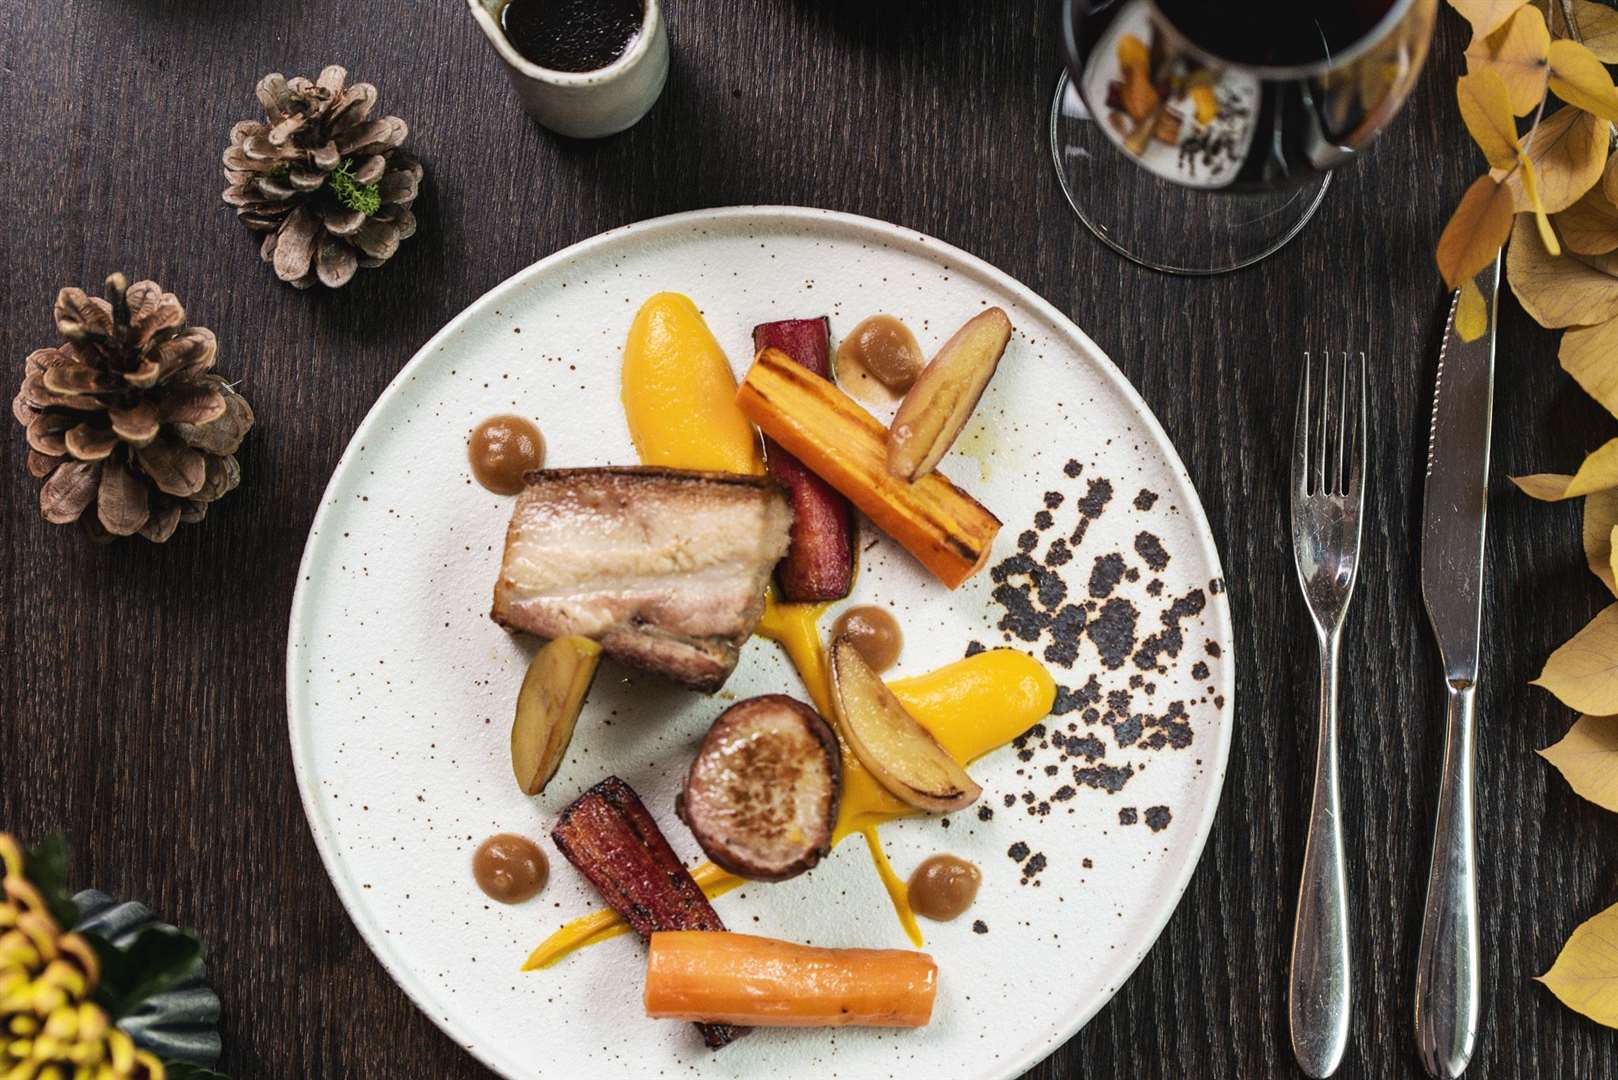 Dingley Dell pork belly served at The Montagu Kitchen